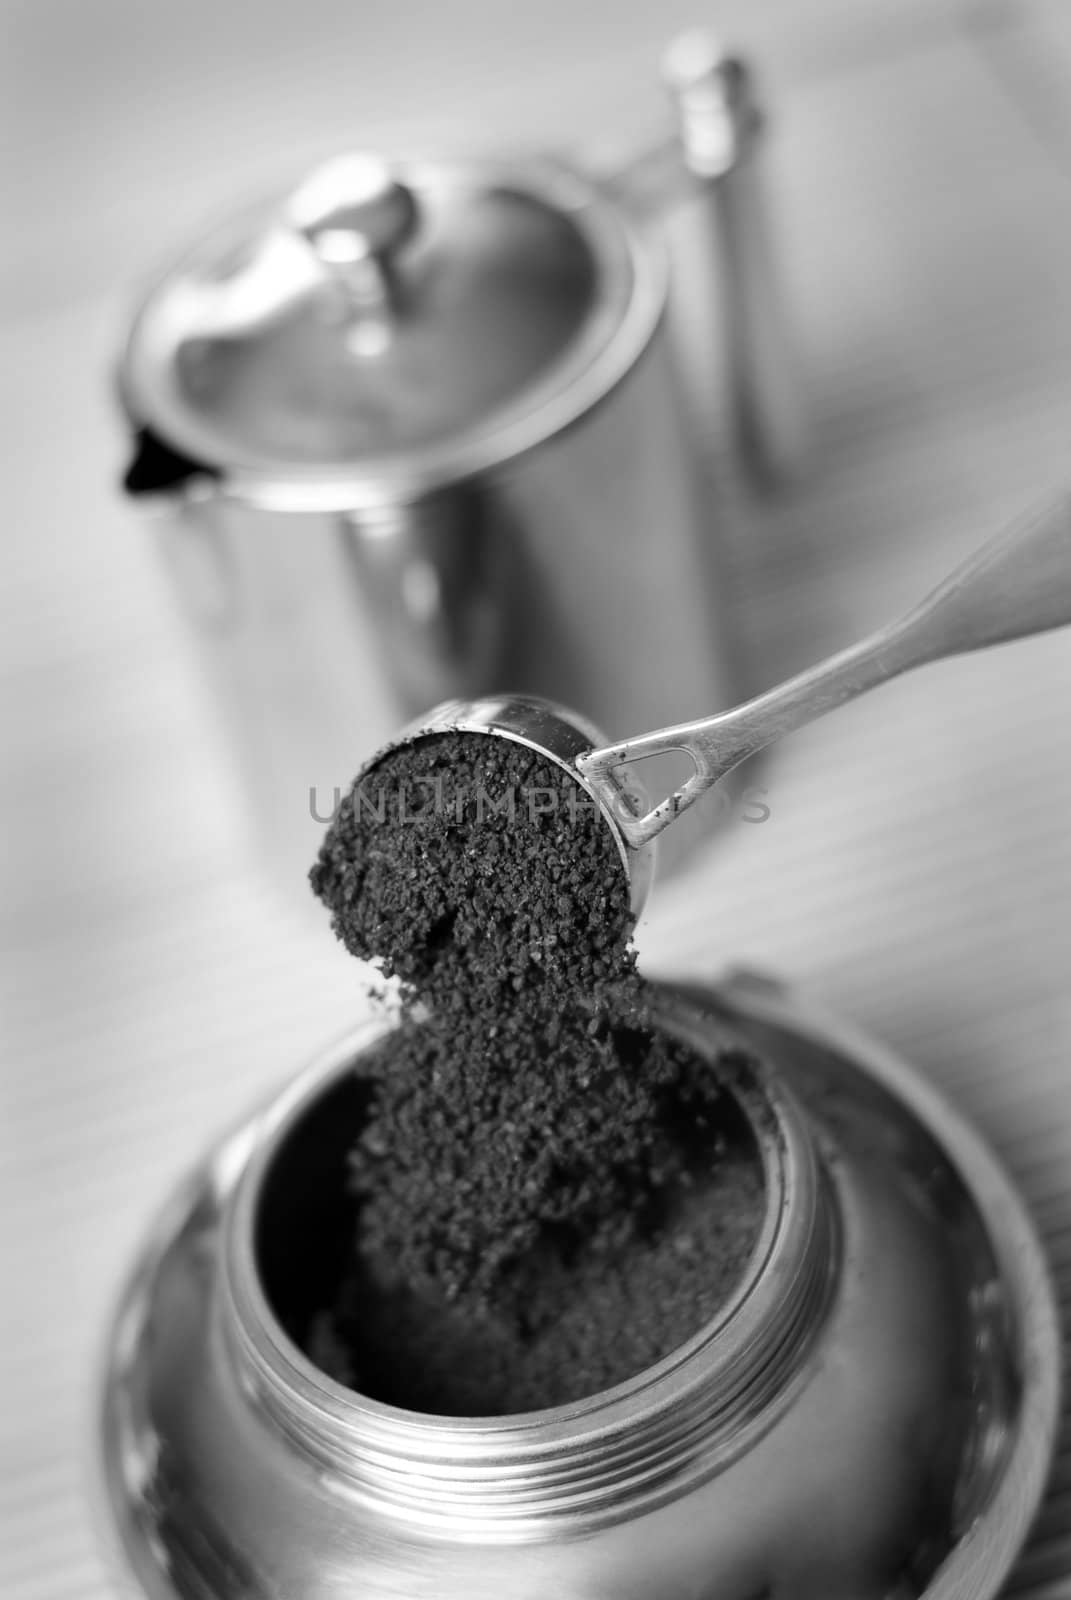 Pouring ground coffee (focus on it) into coffee maker. Black and white. Shallow depth of field.